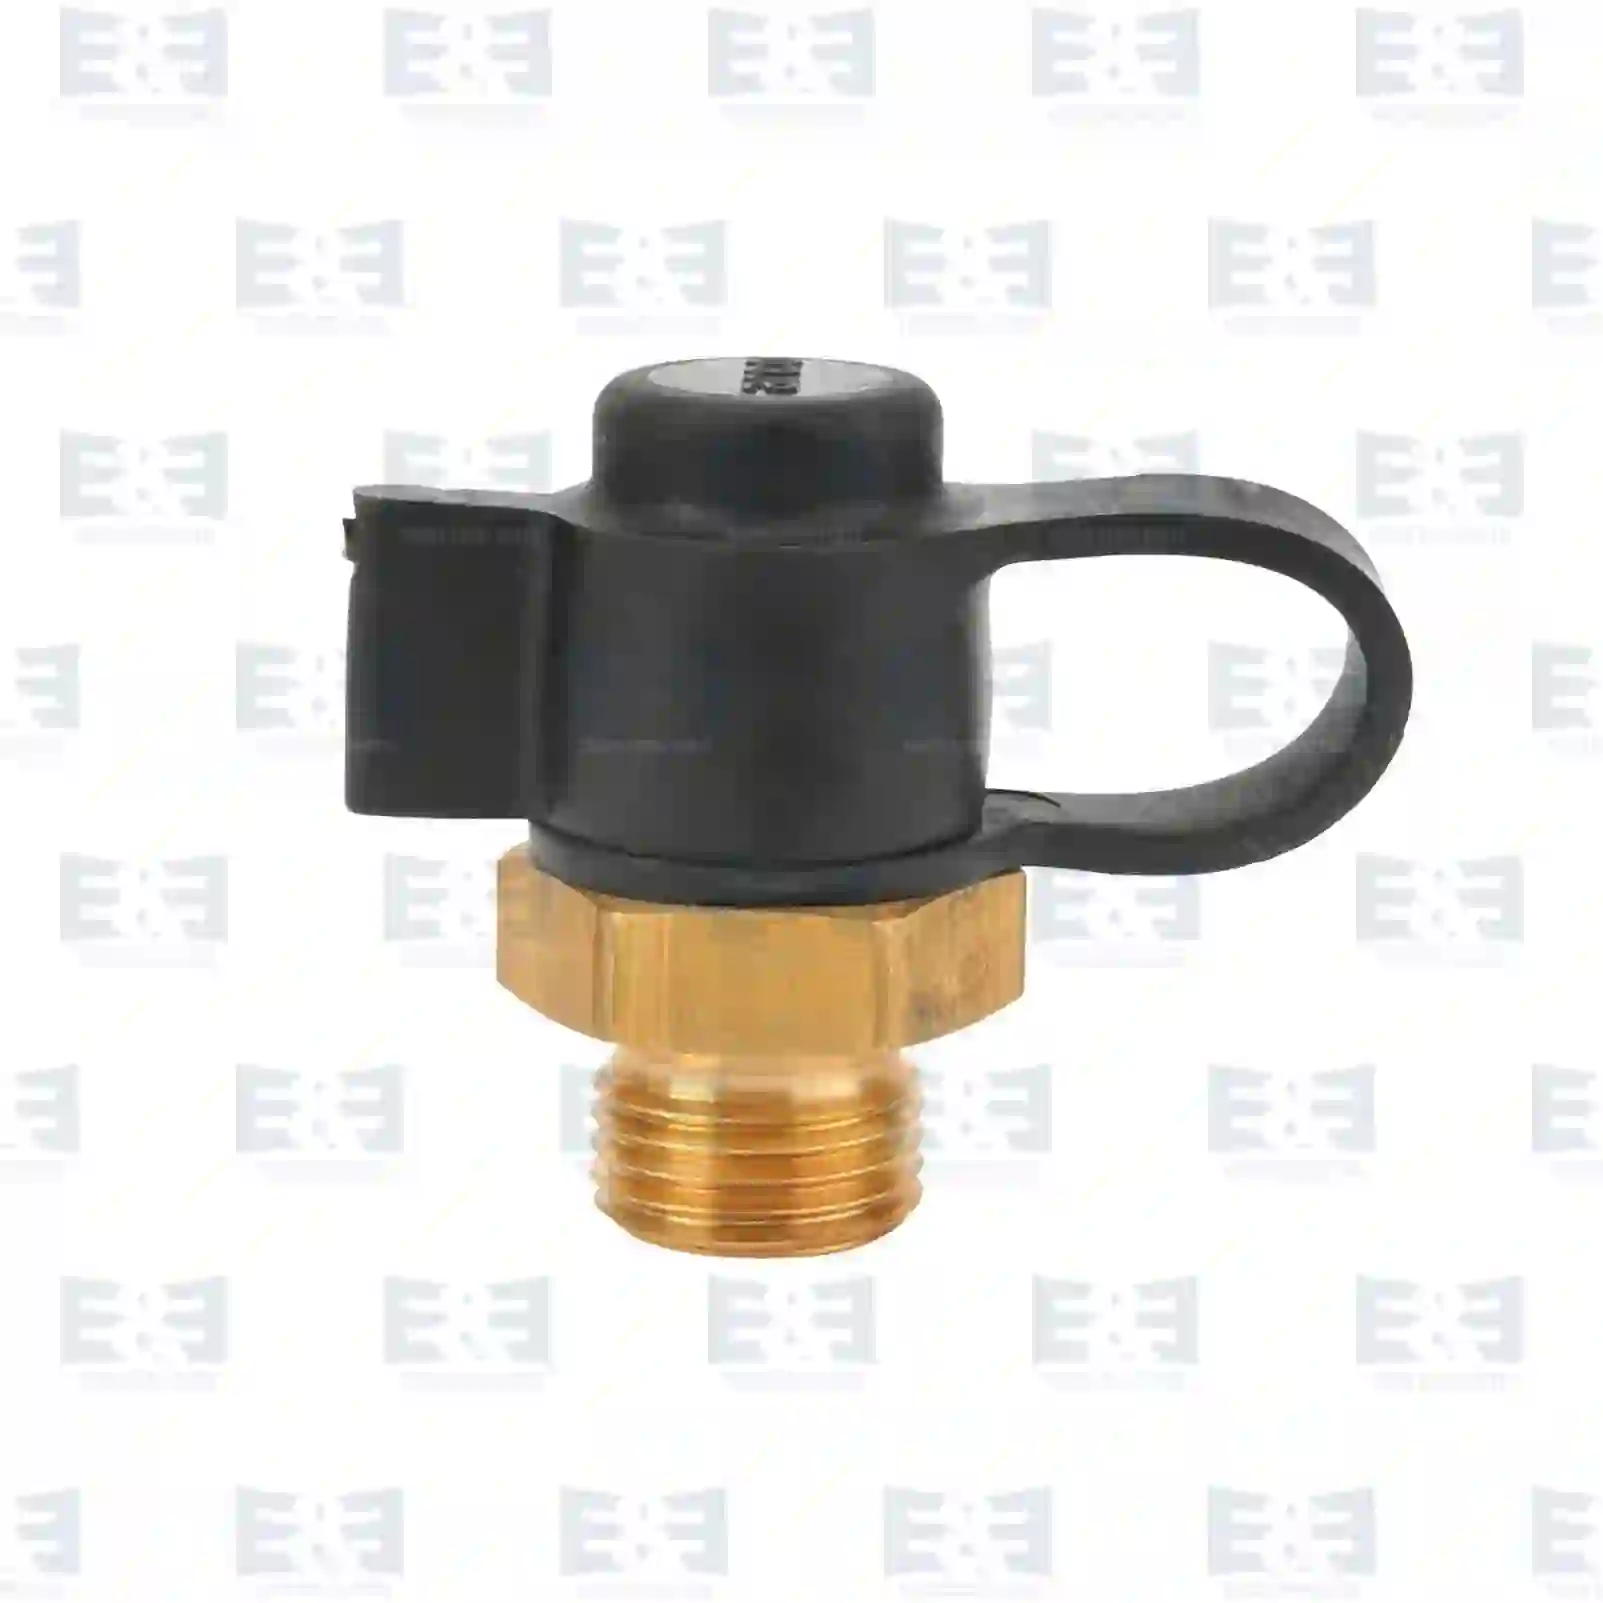 Compressed Air Test connector, EE No 2E2285658 ,  oem no:0228011400, 1506701, 9463703120, 98177679, 7401592924, 1912285, 1581552, 1592924, ZG50823-0008 E&E Truck Spare Parts | Truck Spare Parts, Auotomotive Spare Parts